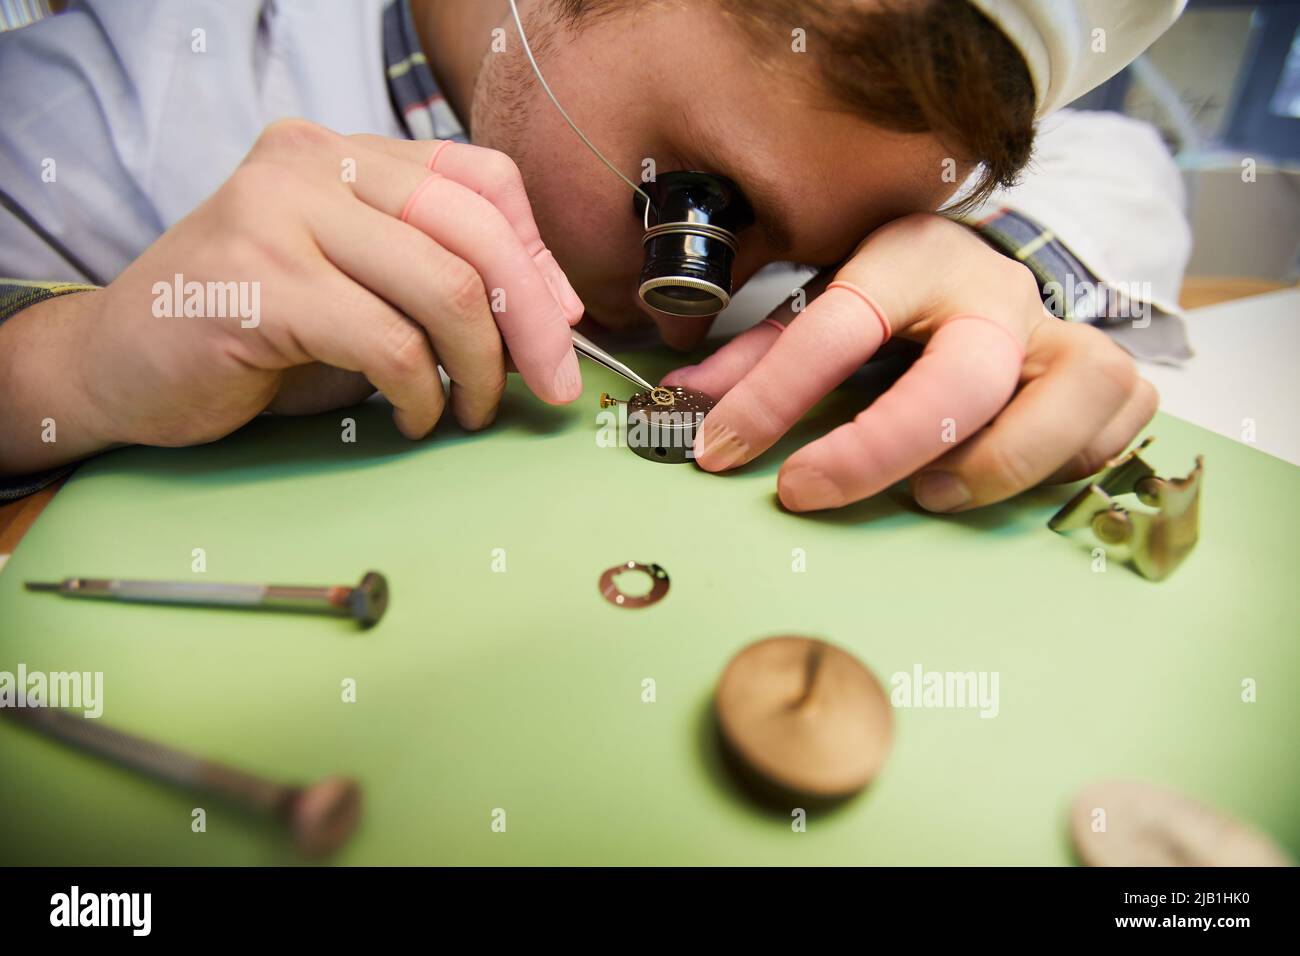 Close-up of concentrated engineer of wristwatch factory wearing monocular magnifying glass using tweezers while assembling watch mechanism Stock Photo